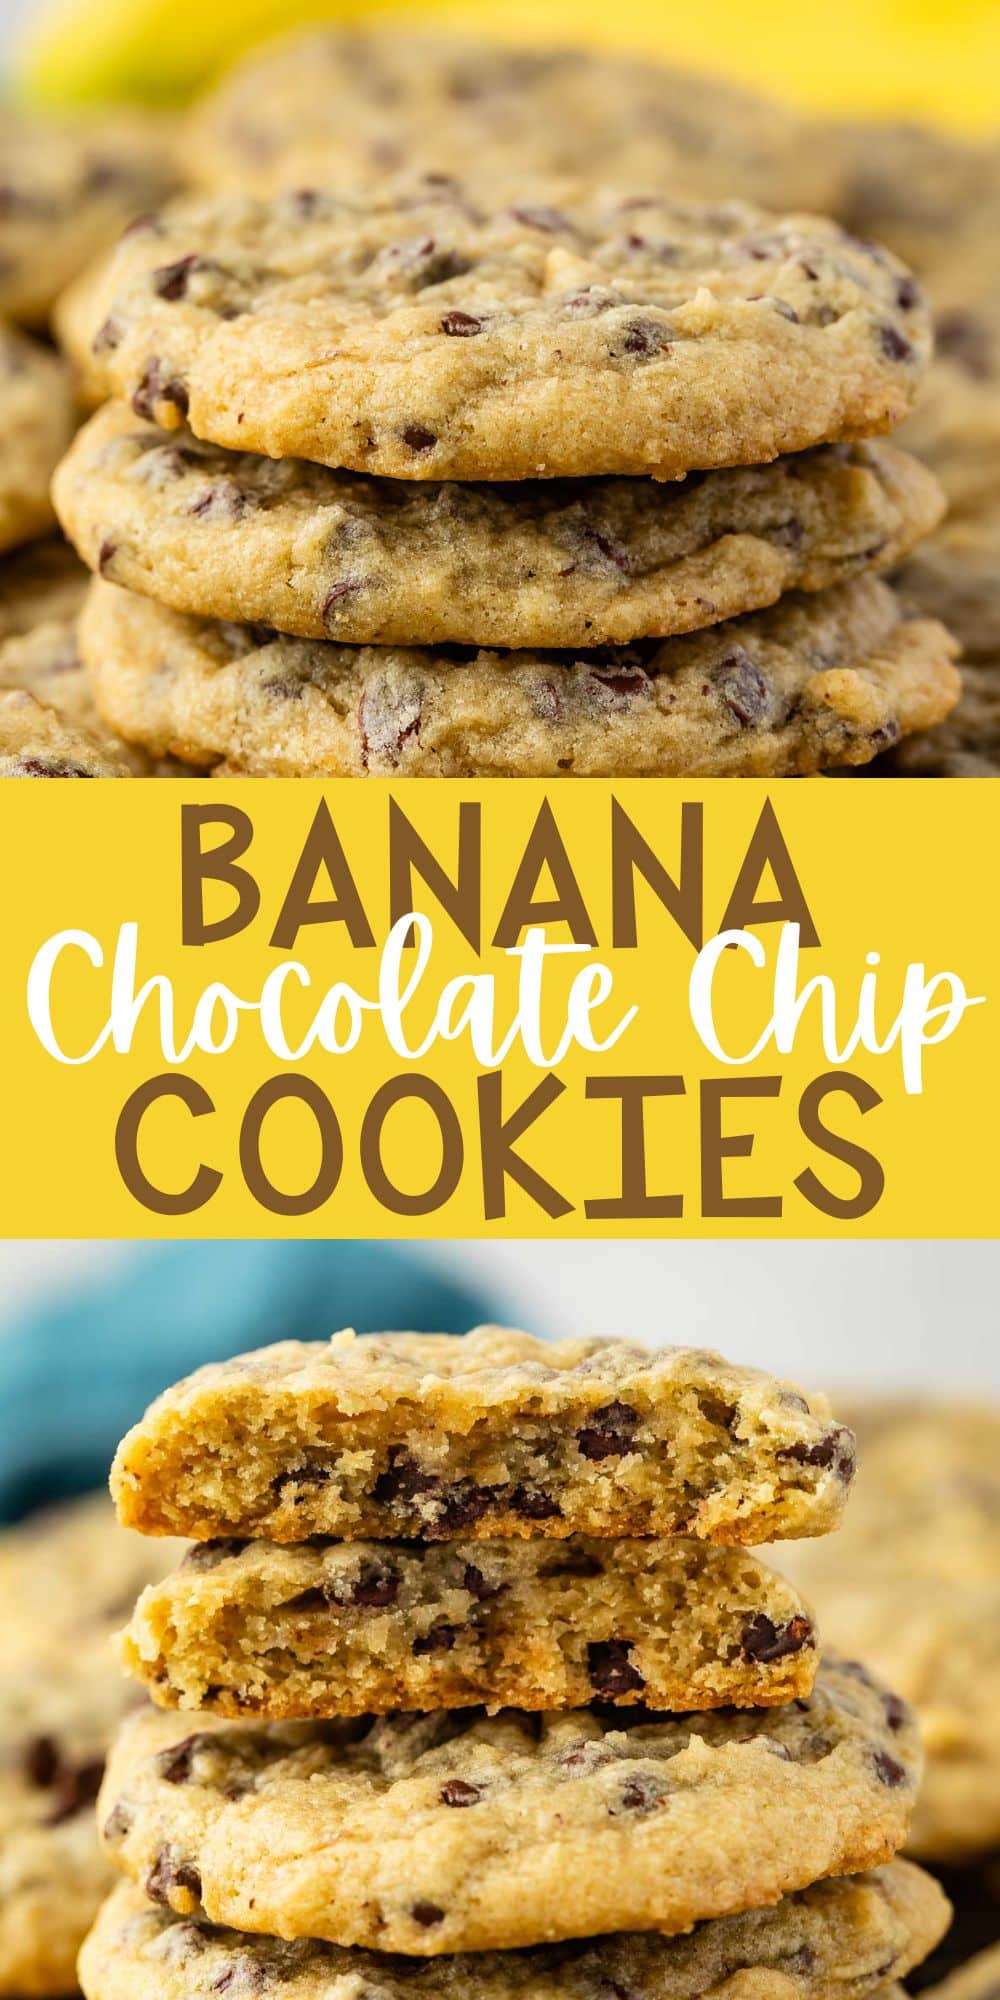 two images of stacked cookies with chocolate chips baked in and bananas in the back with words on the image.